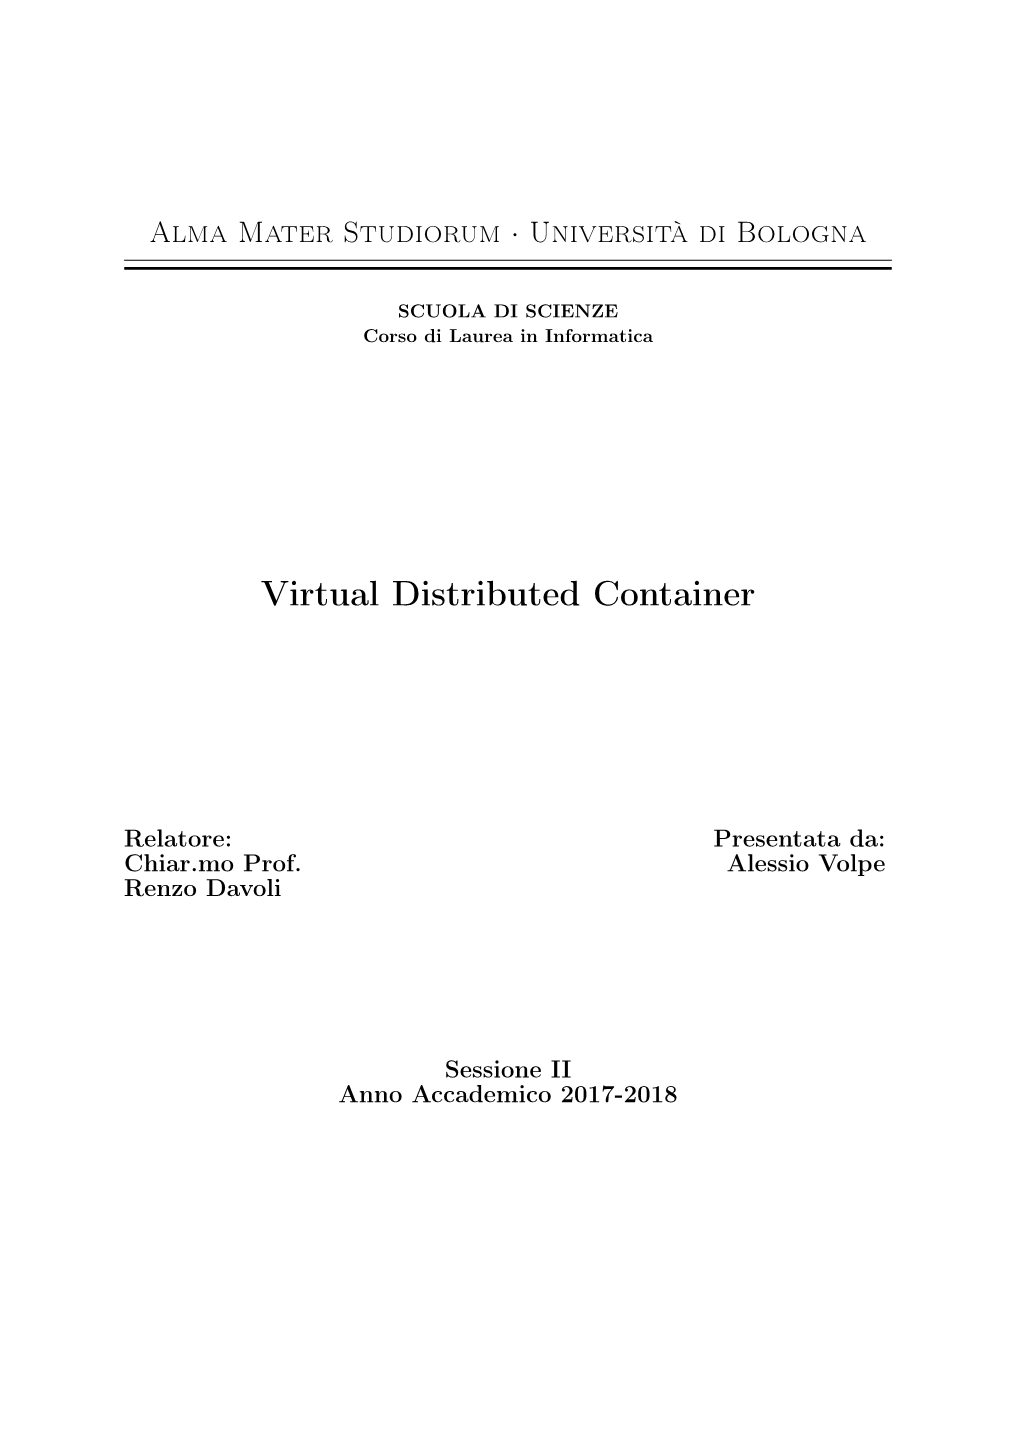 Virtual Distributed Container